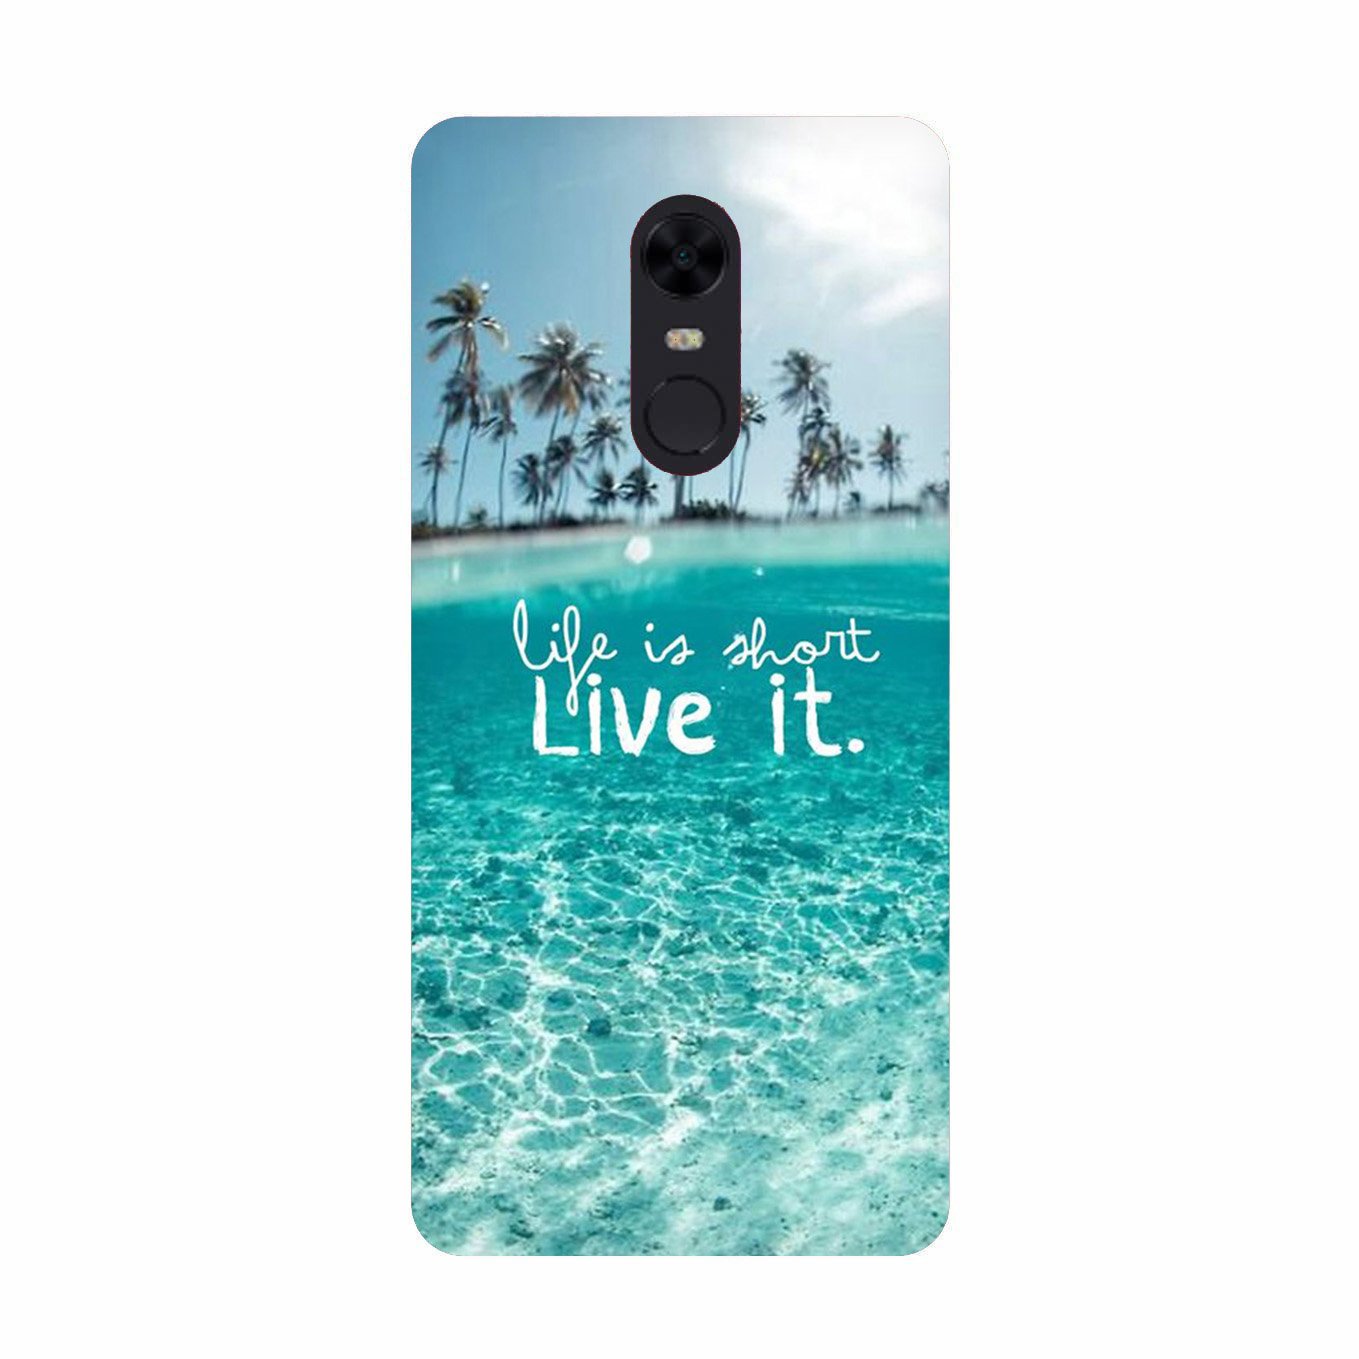 Life is short live it Case for Redmi 5